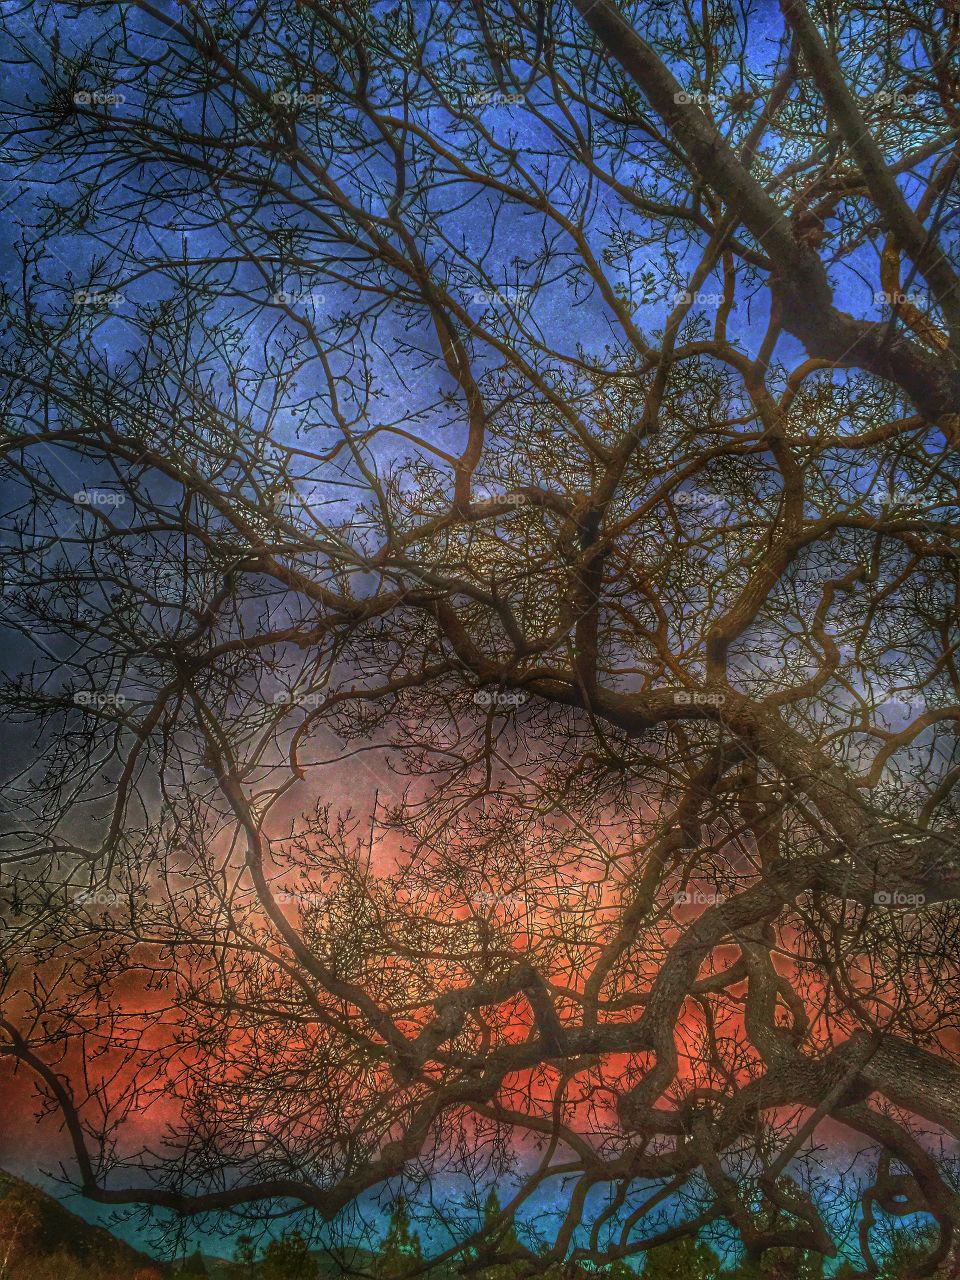 Sunset thru the Oak Tree. A colorful sunset silhouettes an old oak tree